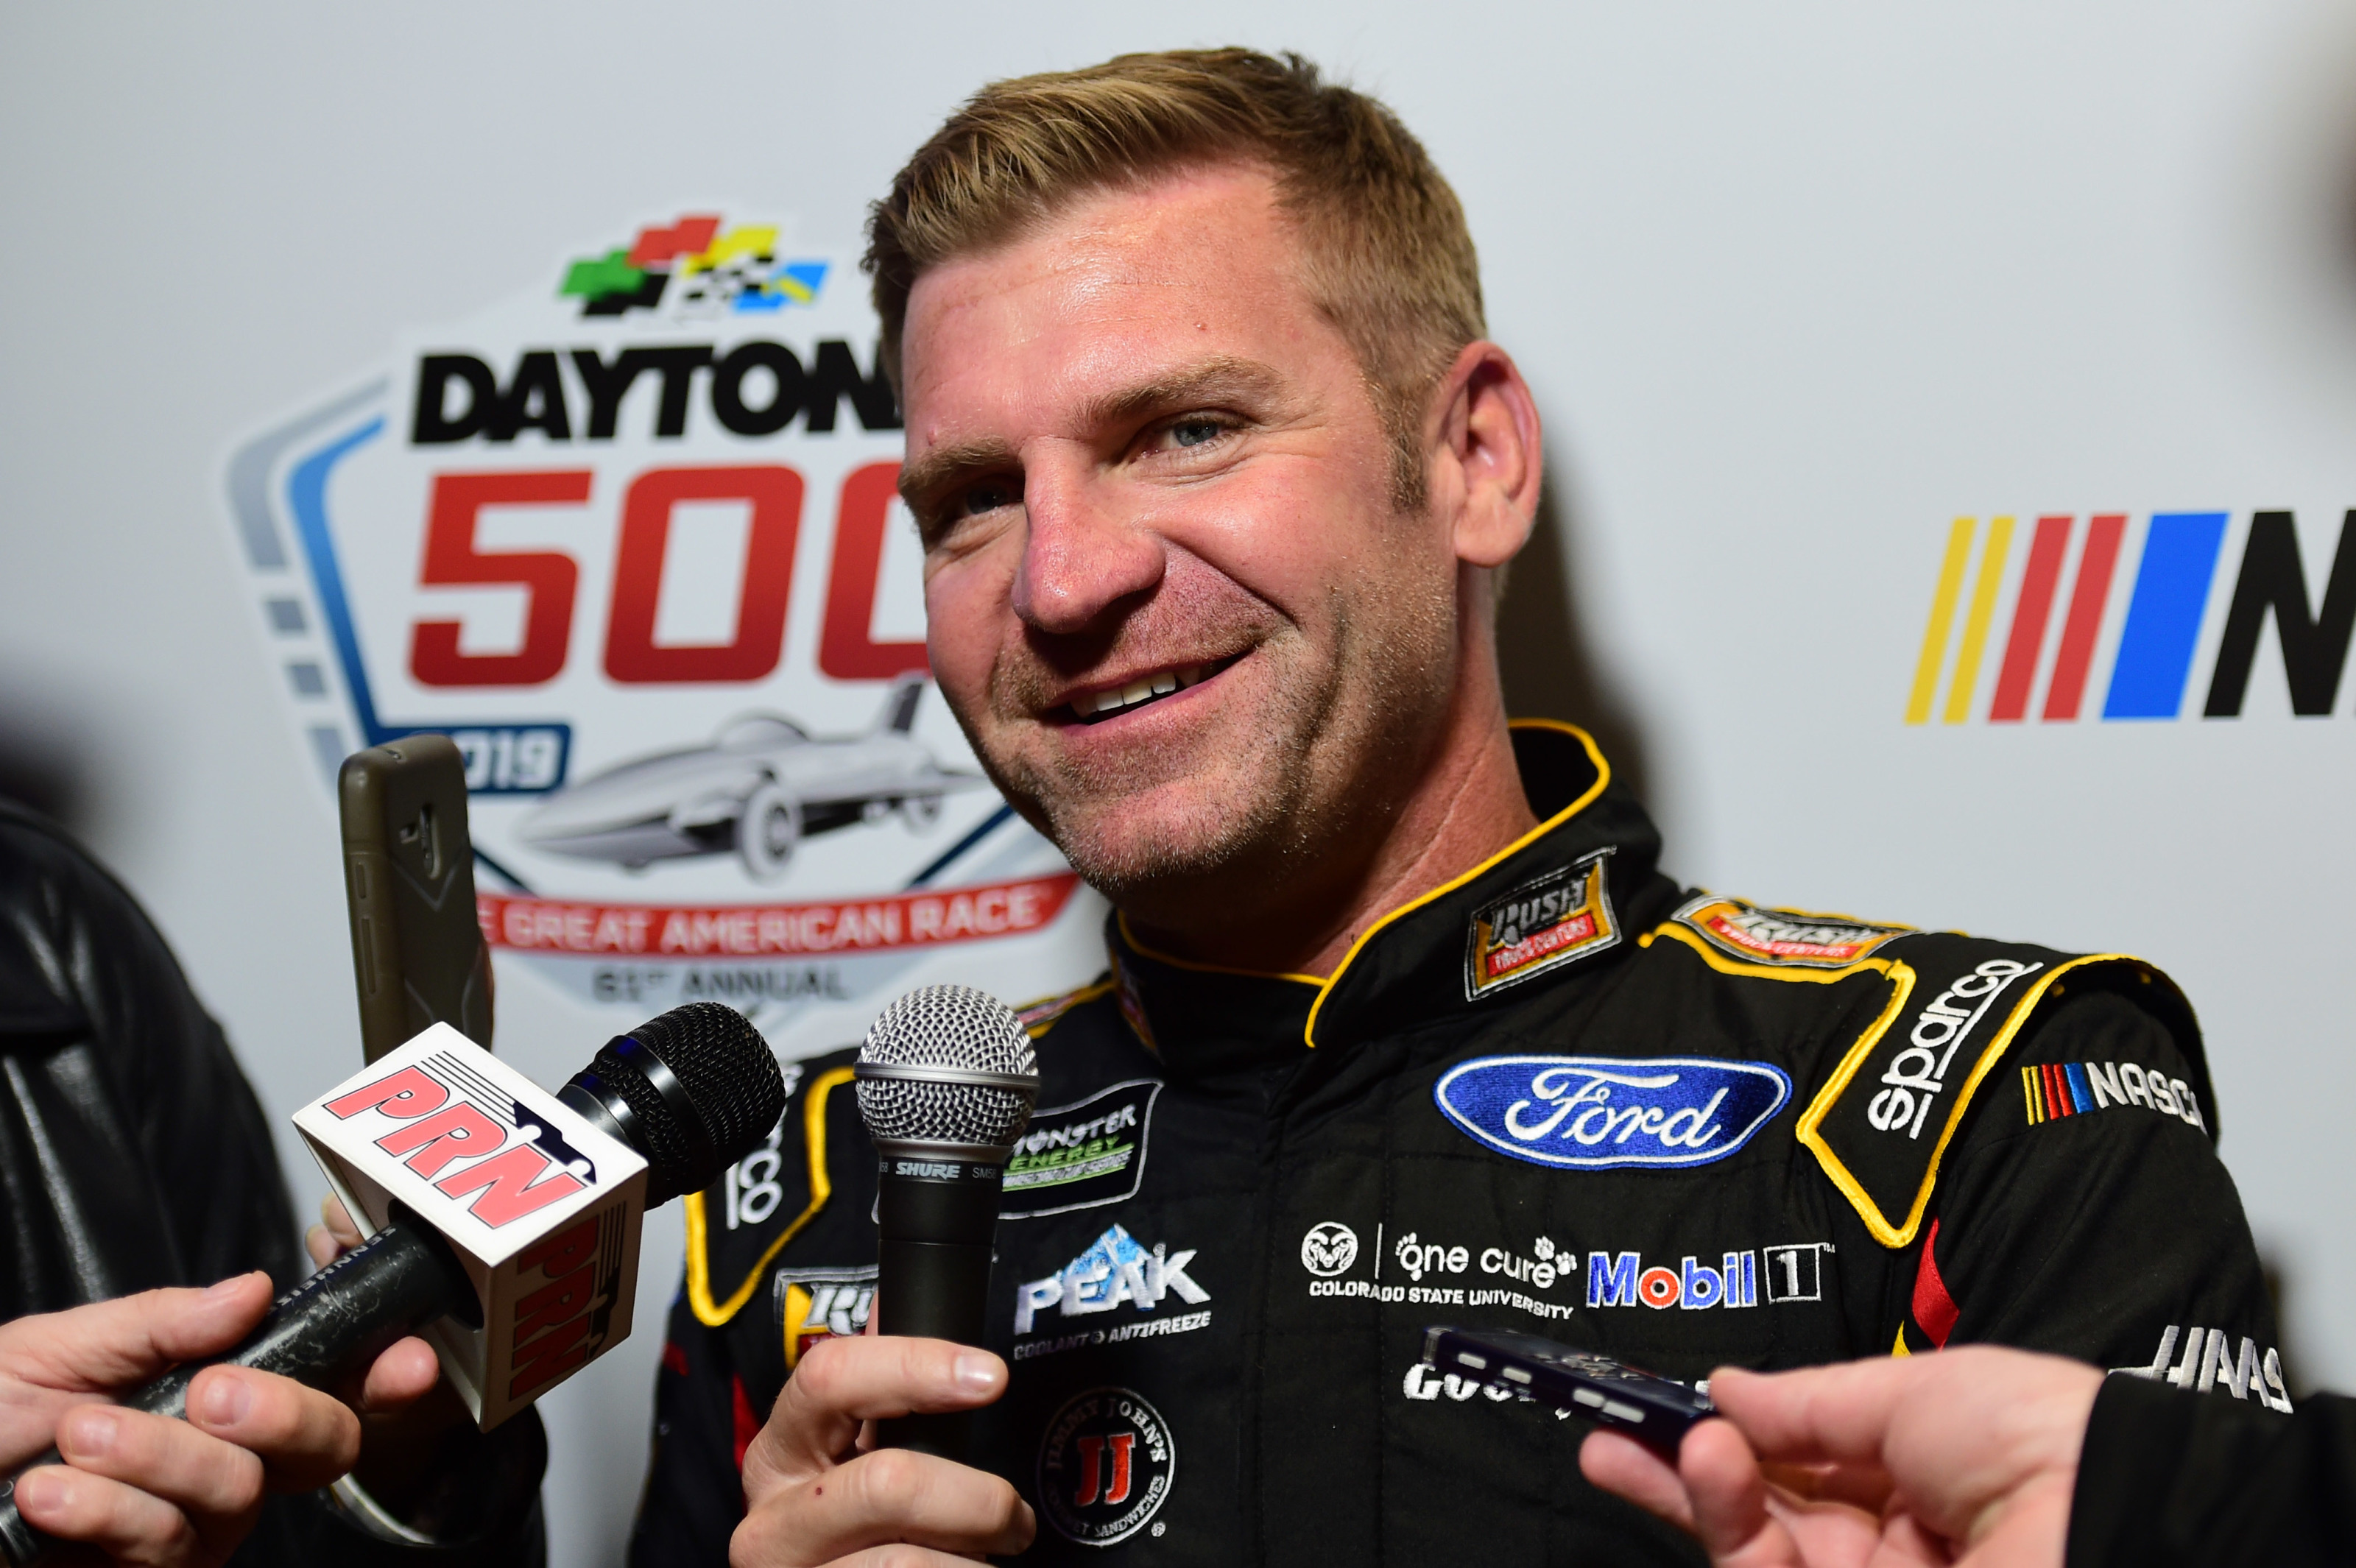 NASCAR Clint Bowyer aiming to spice up Fox Sports booth